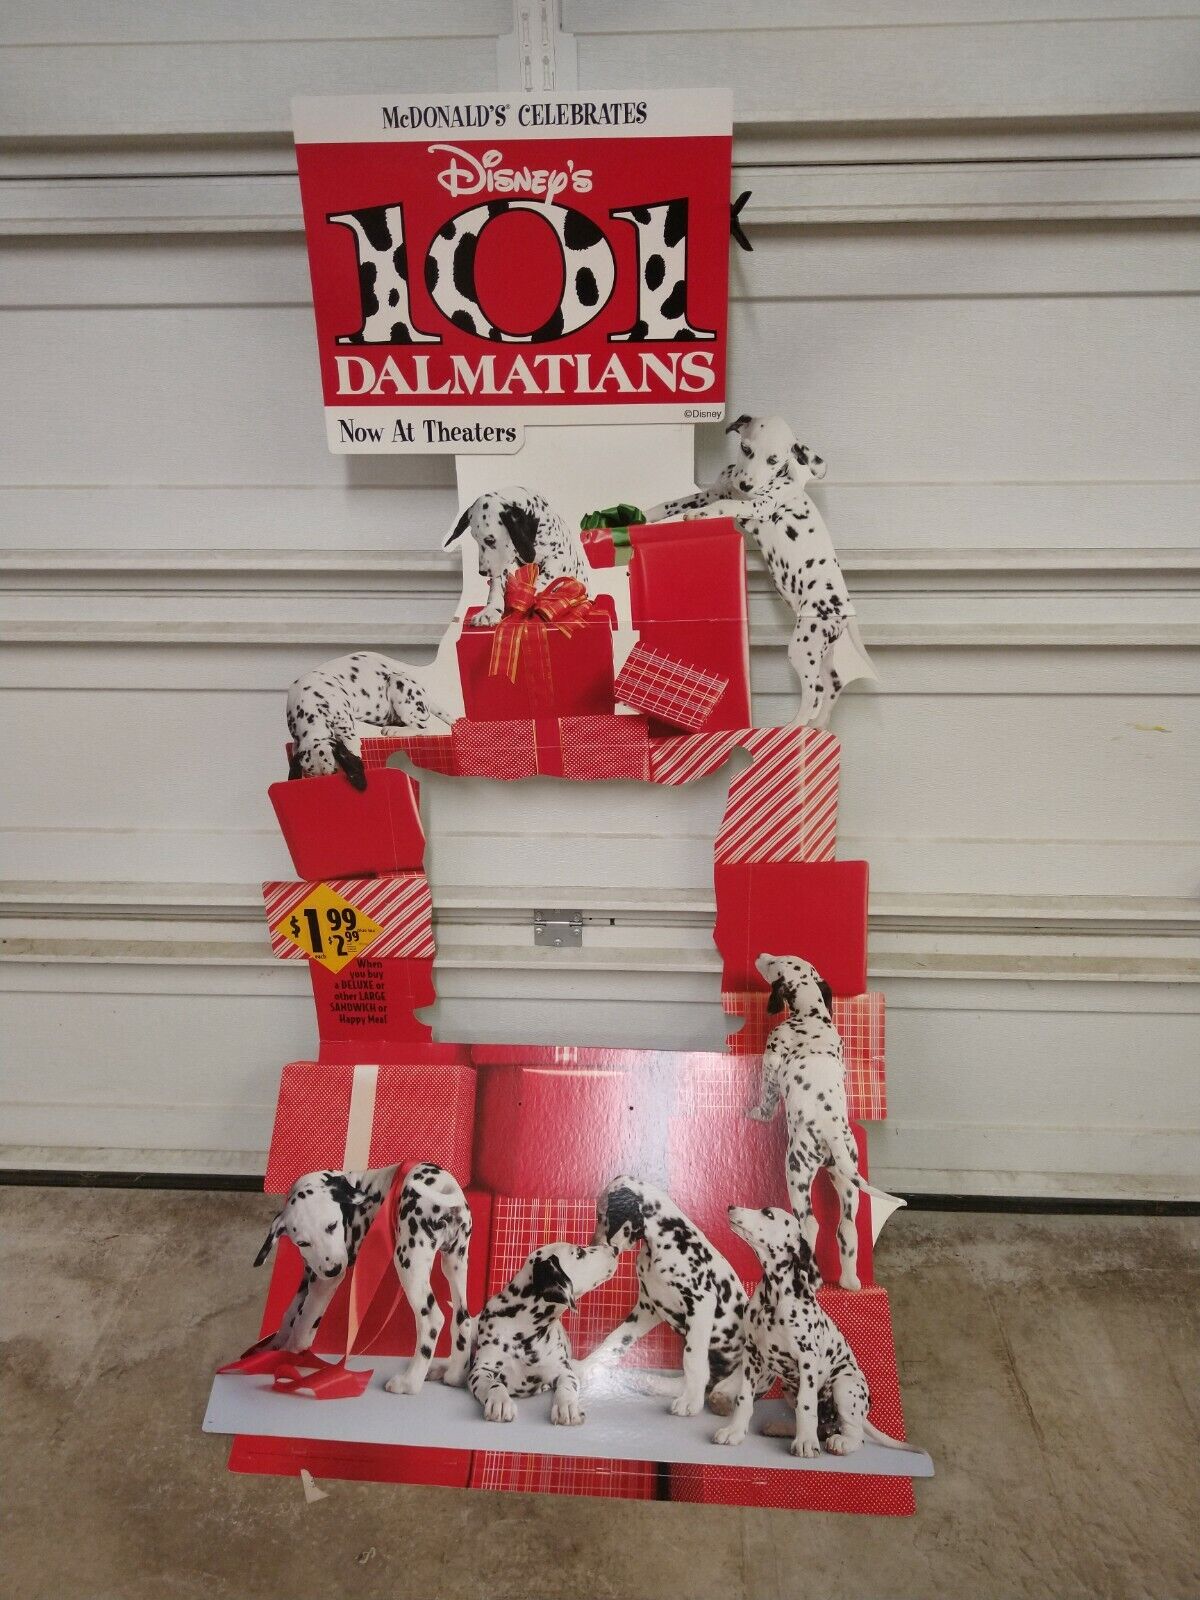 1998 McDonald\'s 101 Dalmatians Cardboard Happy Meal Toy Advertising Sign Display